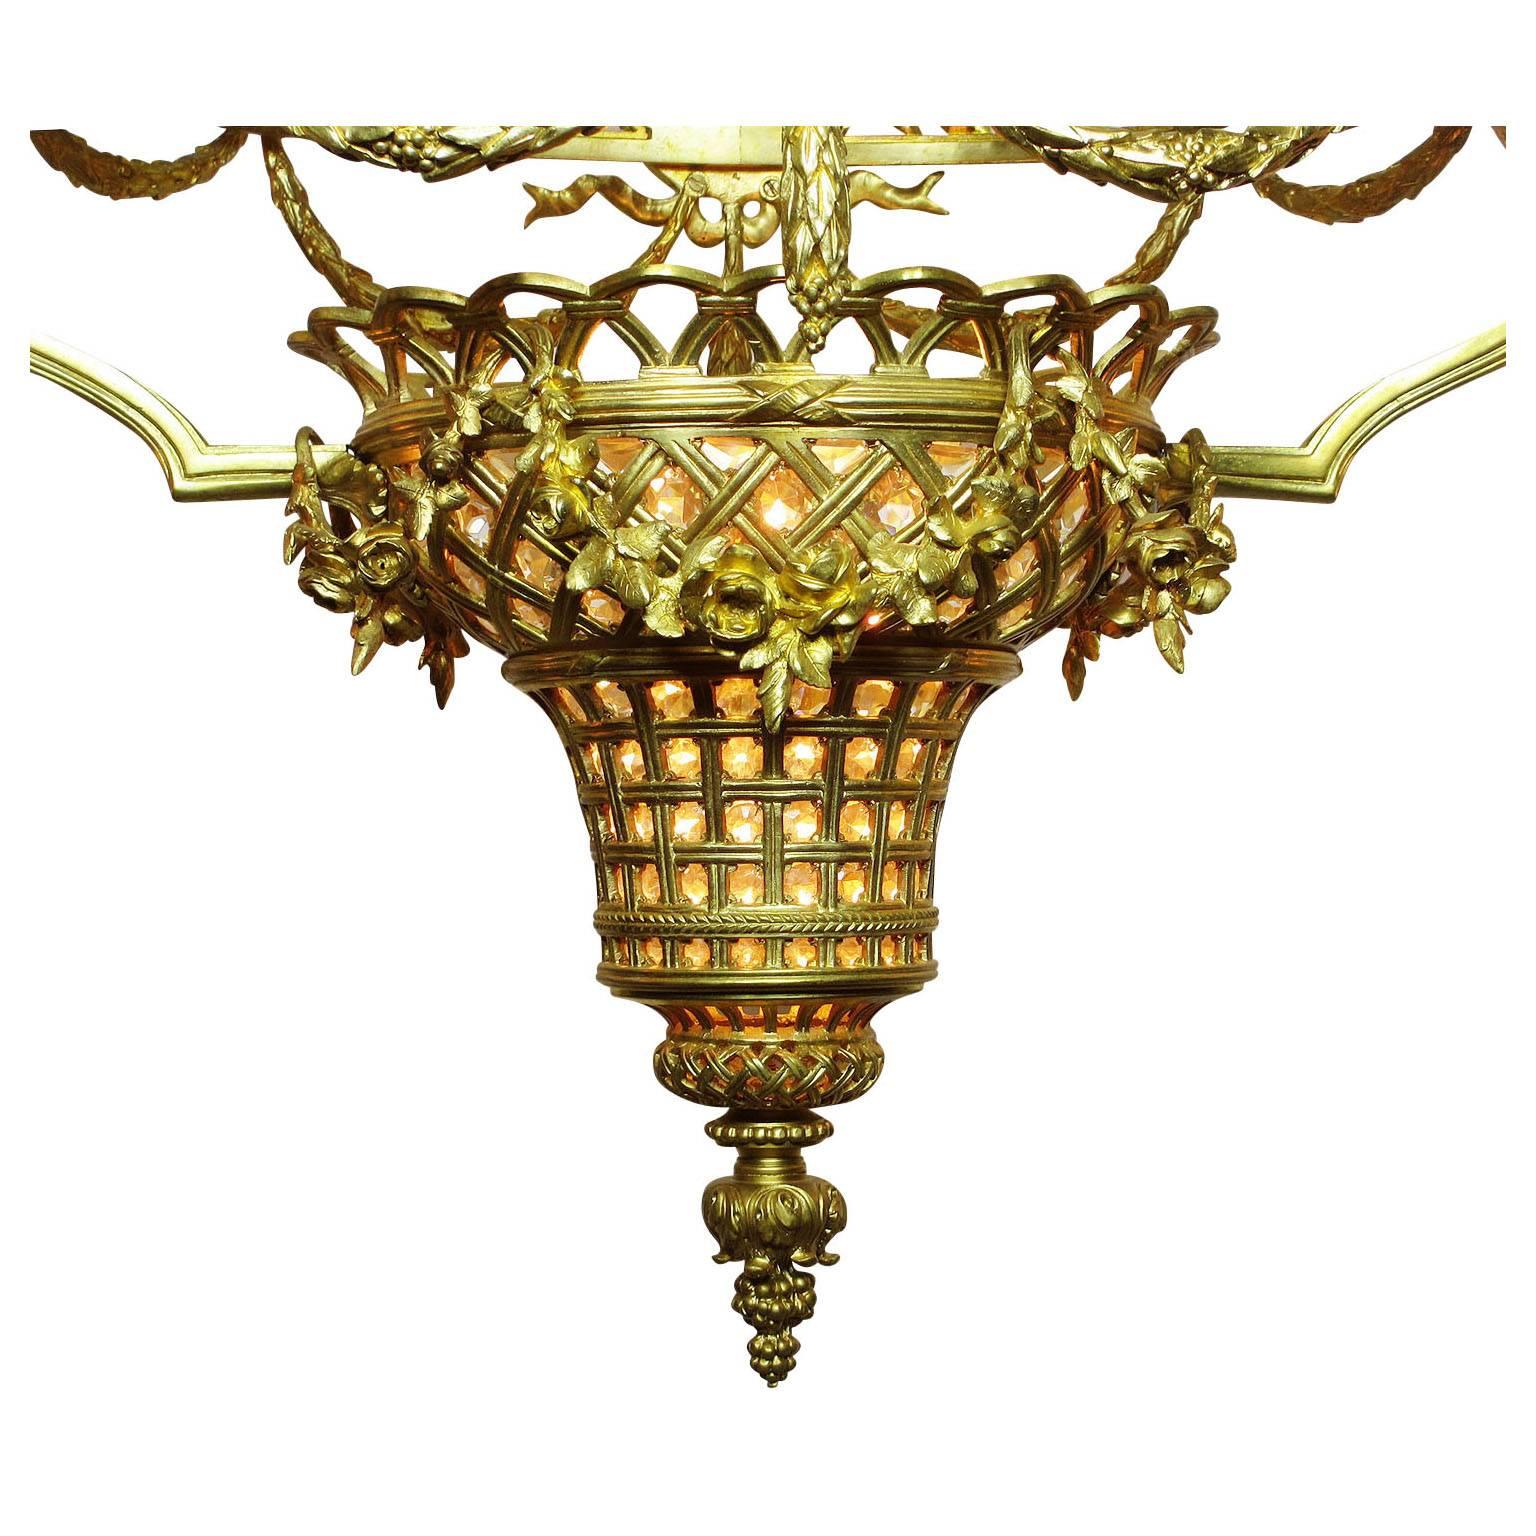 Early 20th Century Palatial French 19th/20th Century Louis XIV Style Gilt-Bronze Orante Chandelier  For Sale